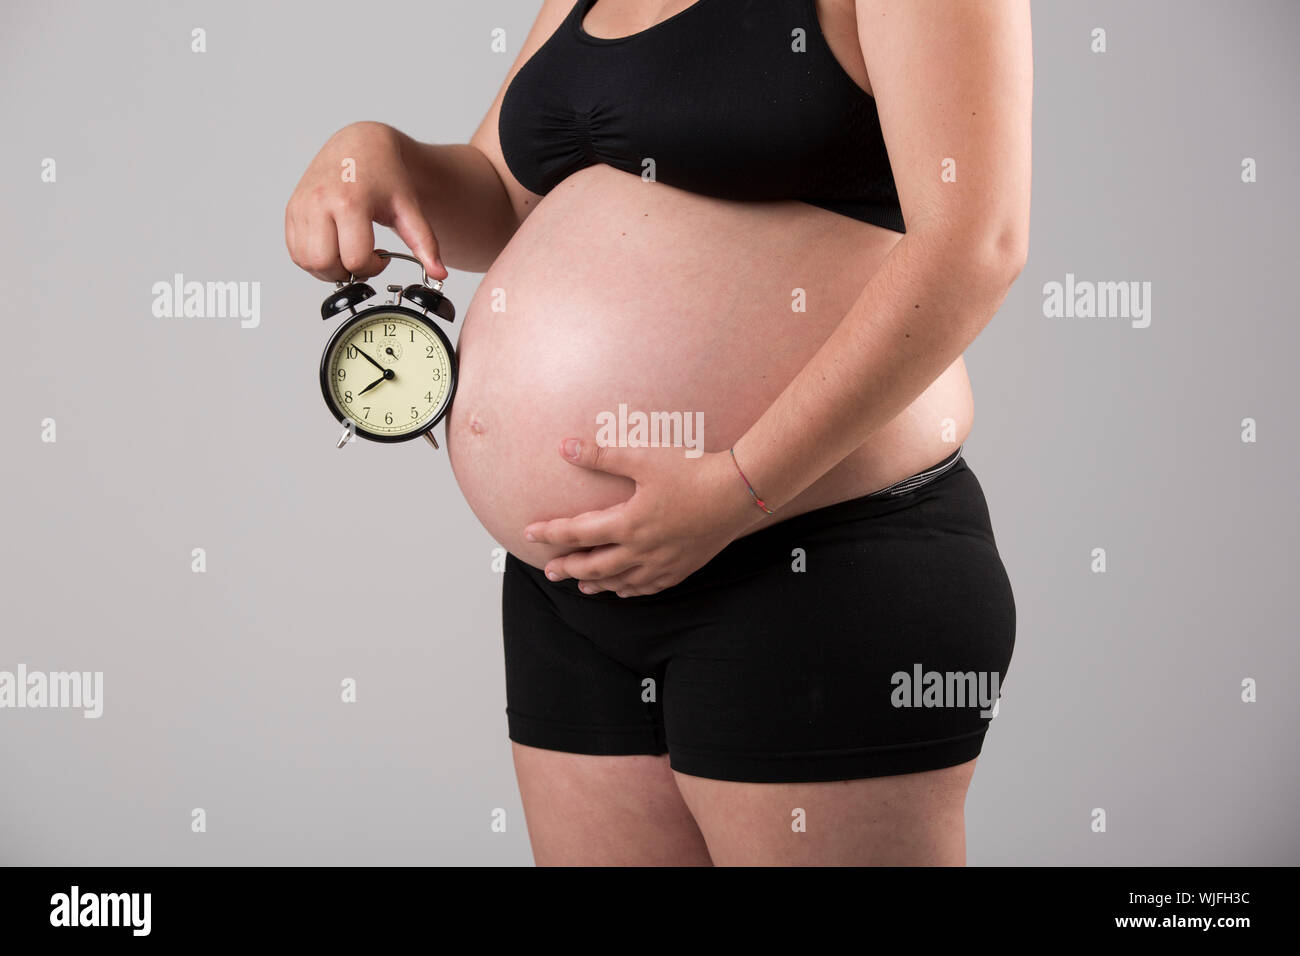 Pregnant woman showing her belly with a clock, over a gray background Stock Photo